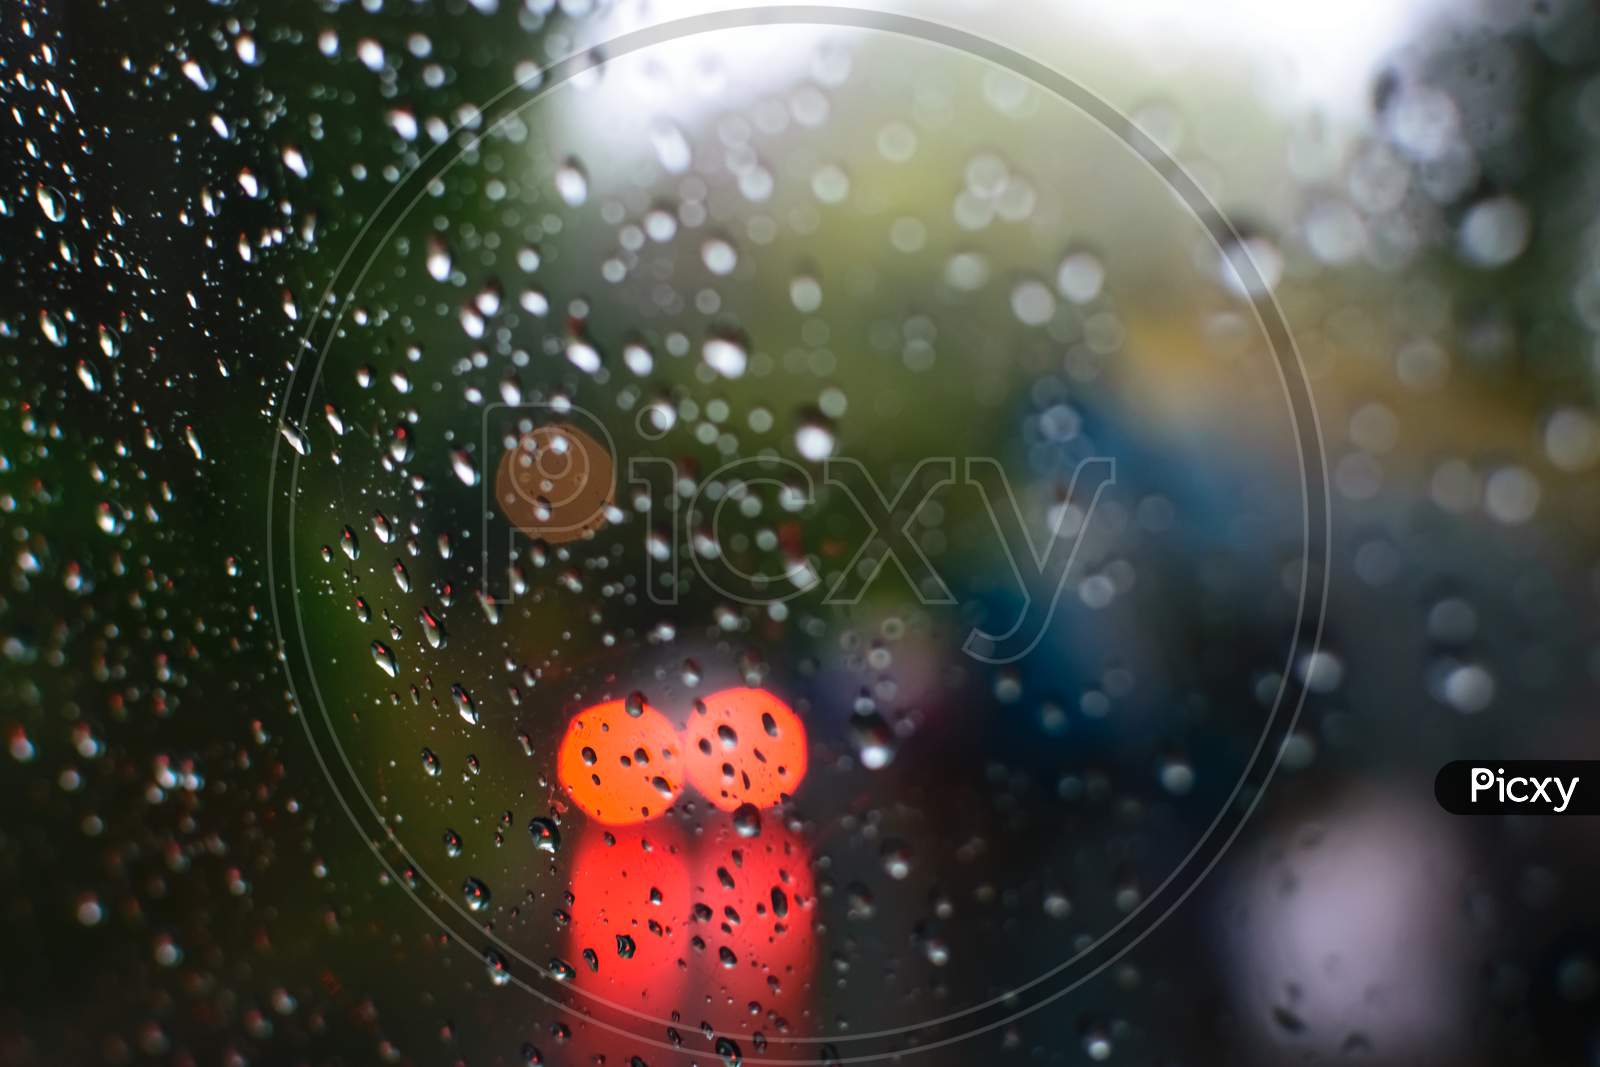 Rain Drops On A Glass With Visible Red Lights Of A Car Through The Glass